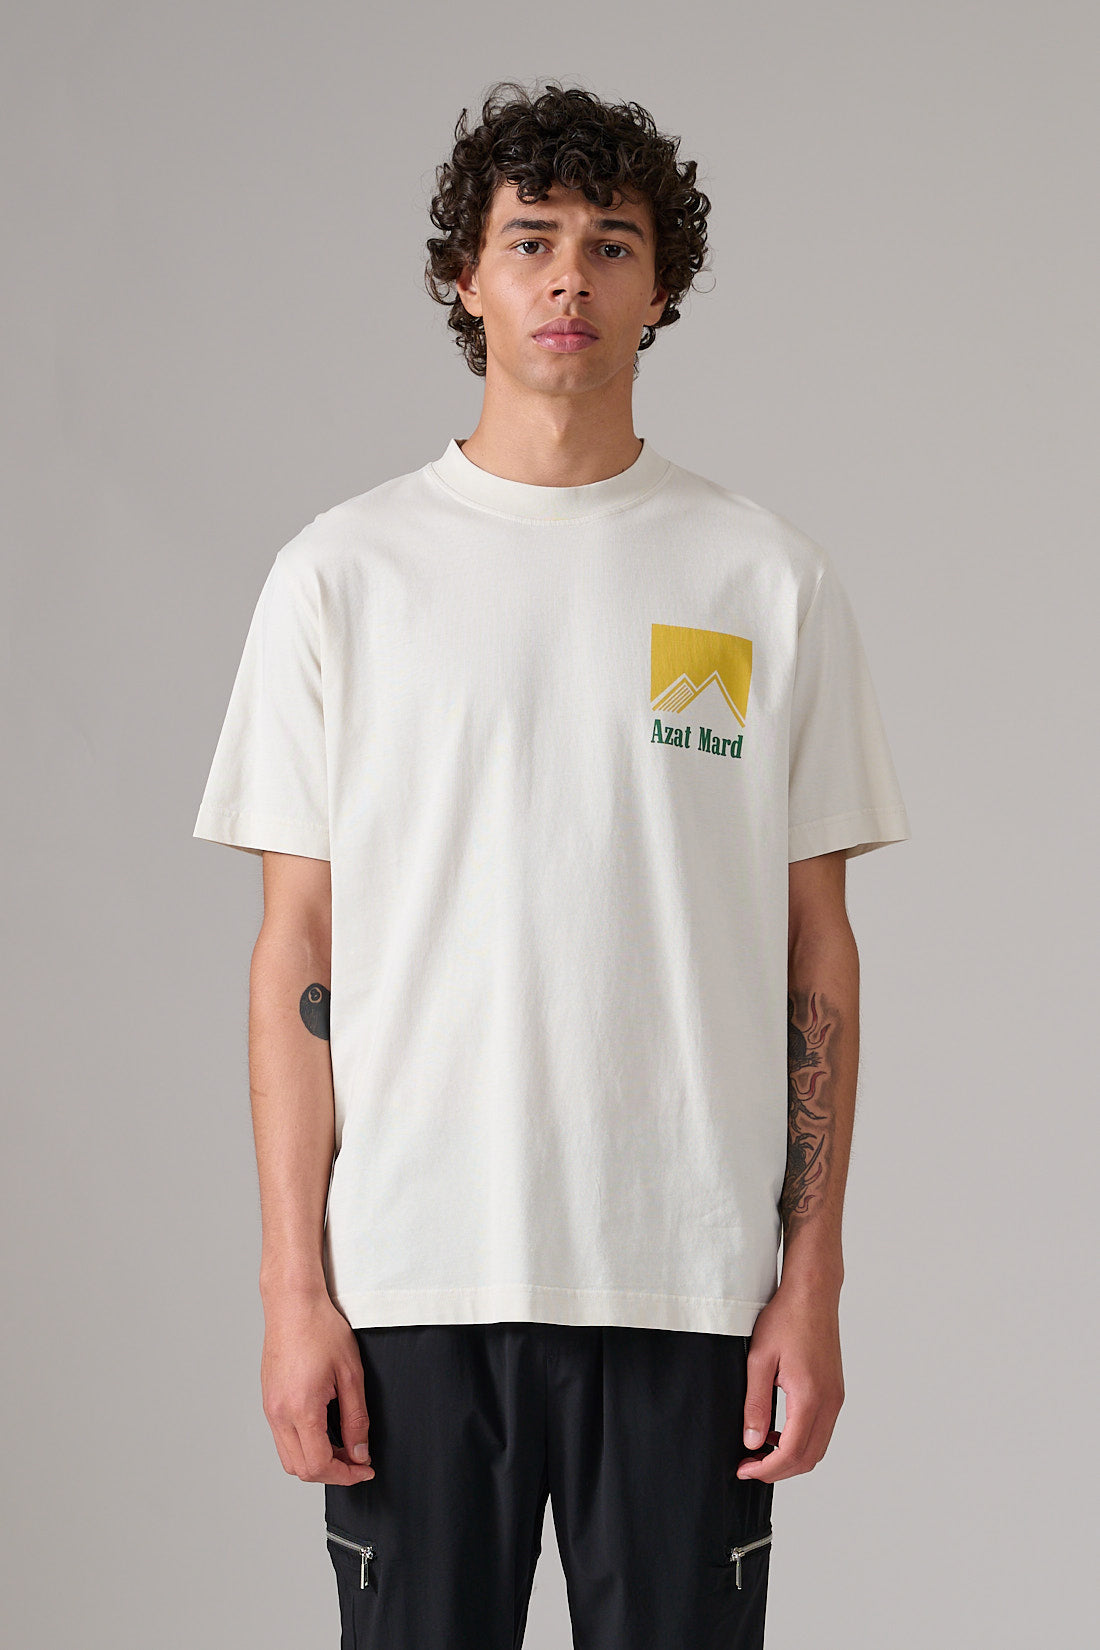 SPECIAL BLENDS WHITE T-SHIRT